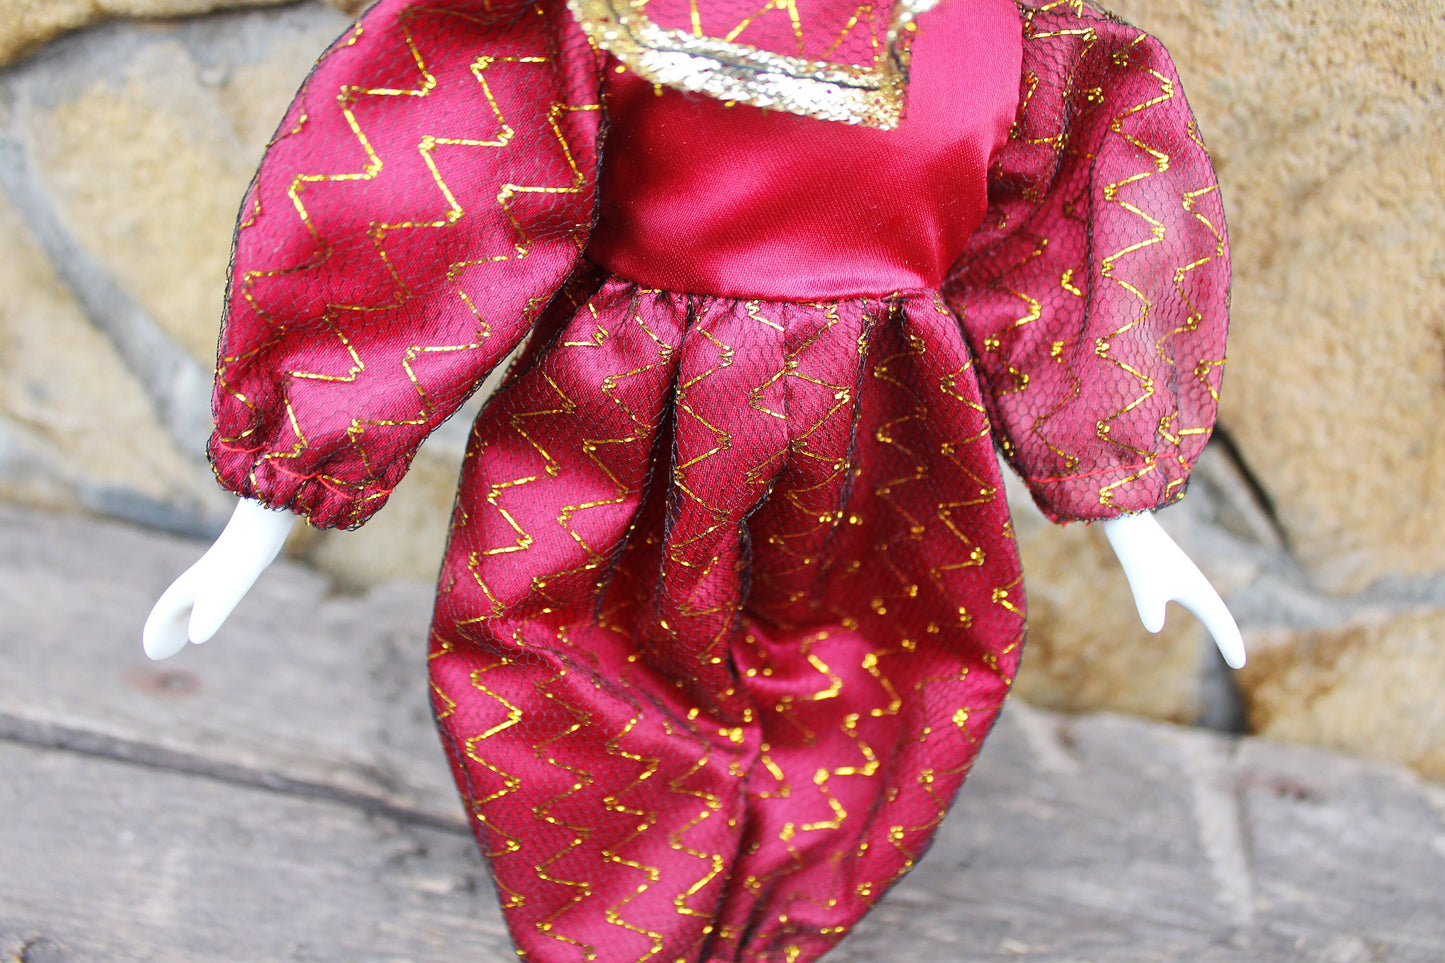 Vintage porcelain Venetian small doll - Harlequin - 9.8 inches- collectible doll - porcelain doll - decor doll - 1980s